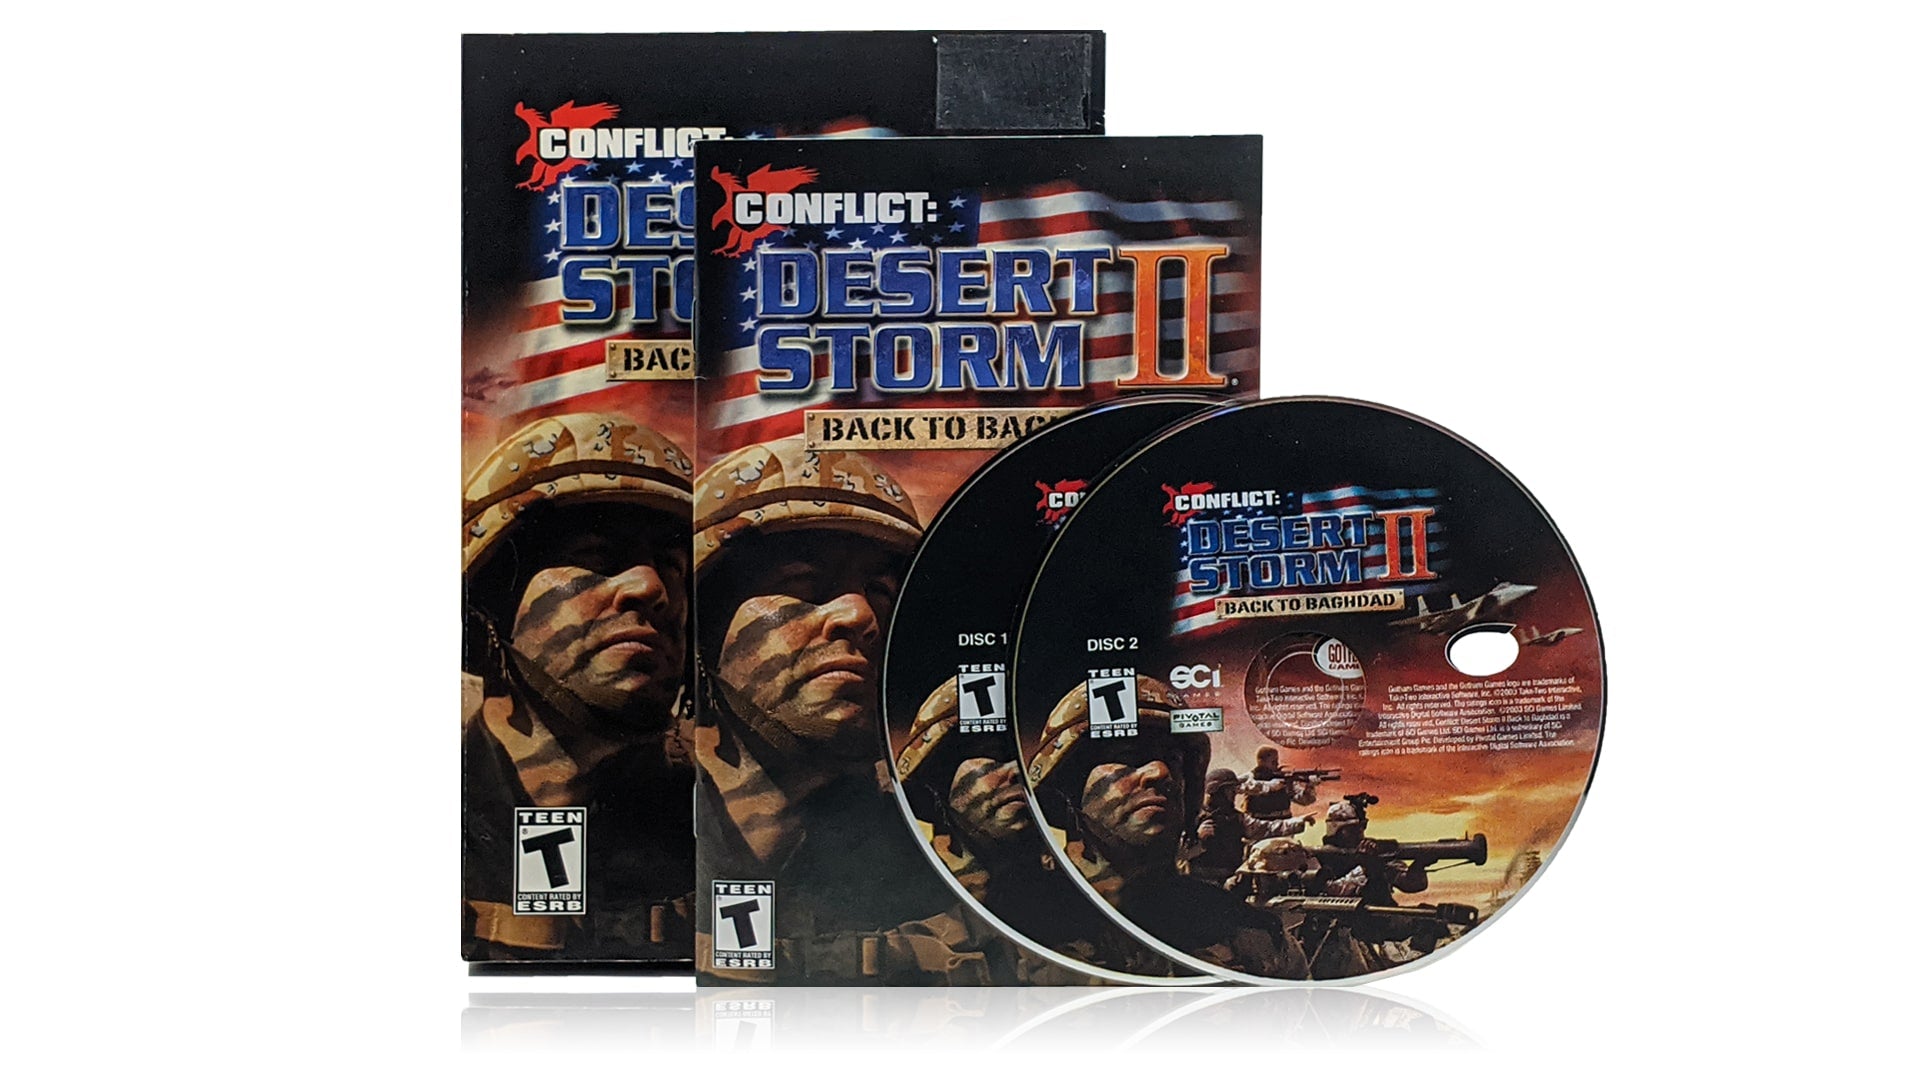 Conflict: Desert Storm II - Back to Baghdad | PC CD-ROM | Box, Manual and Discs